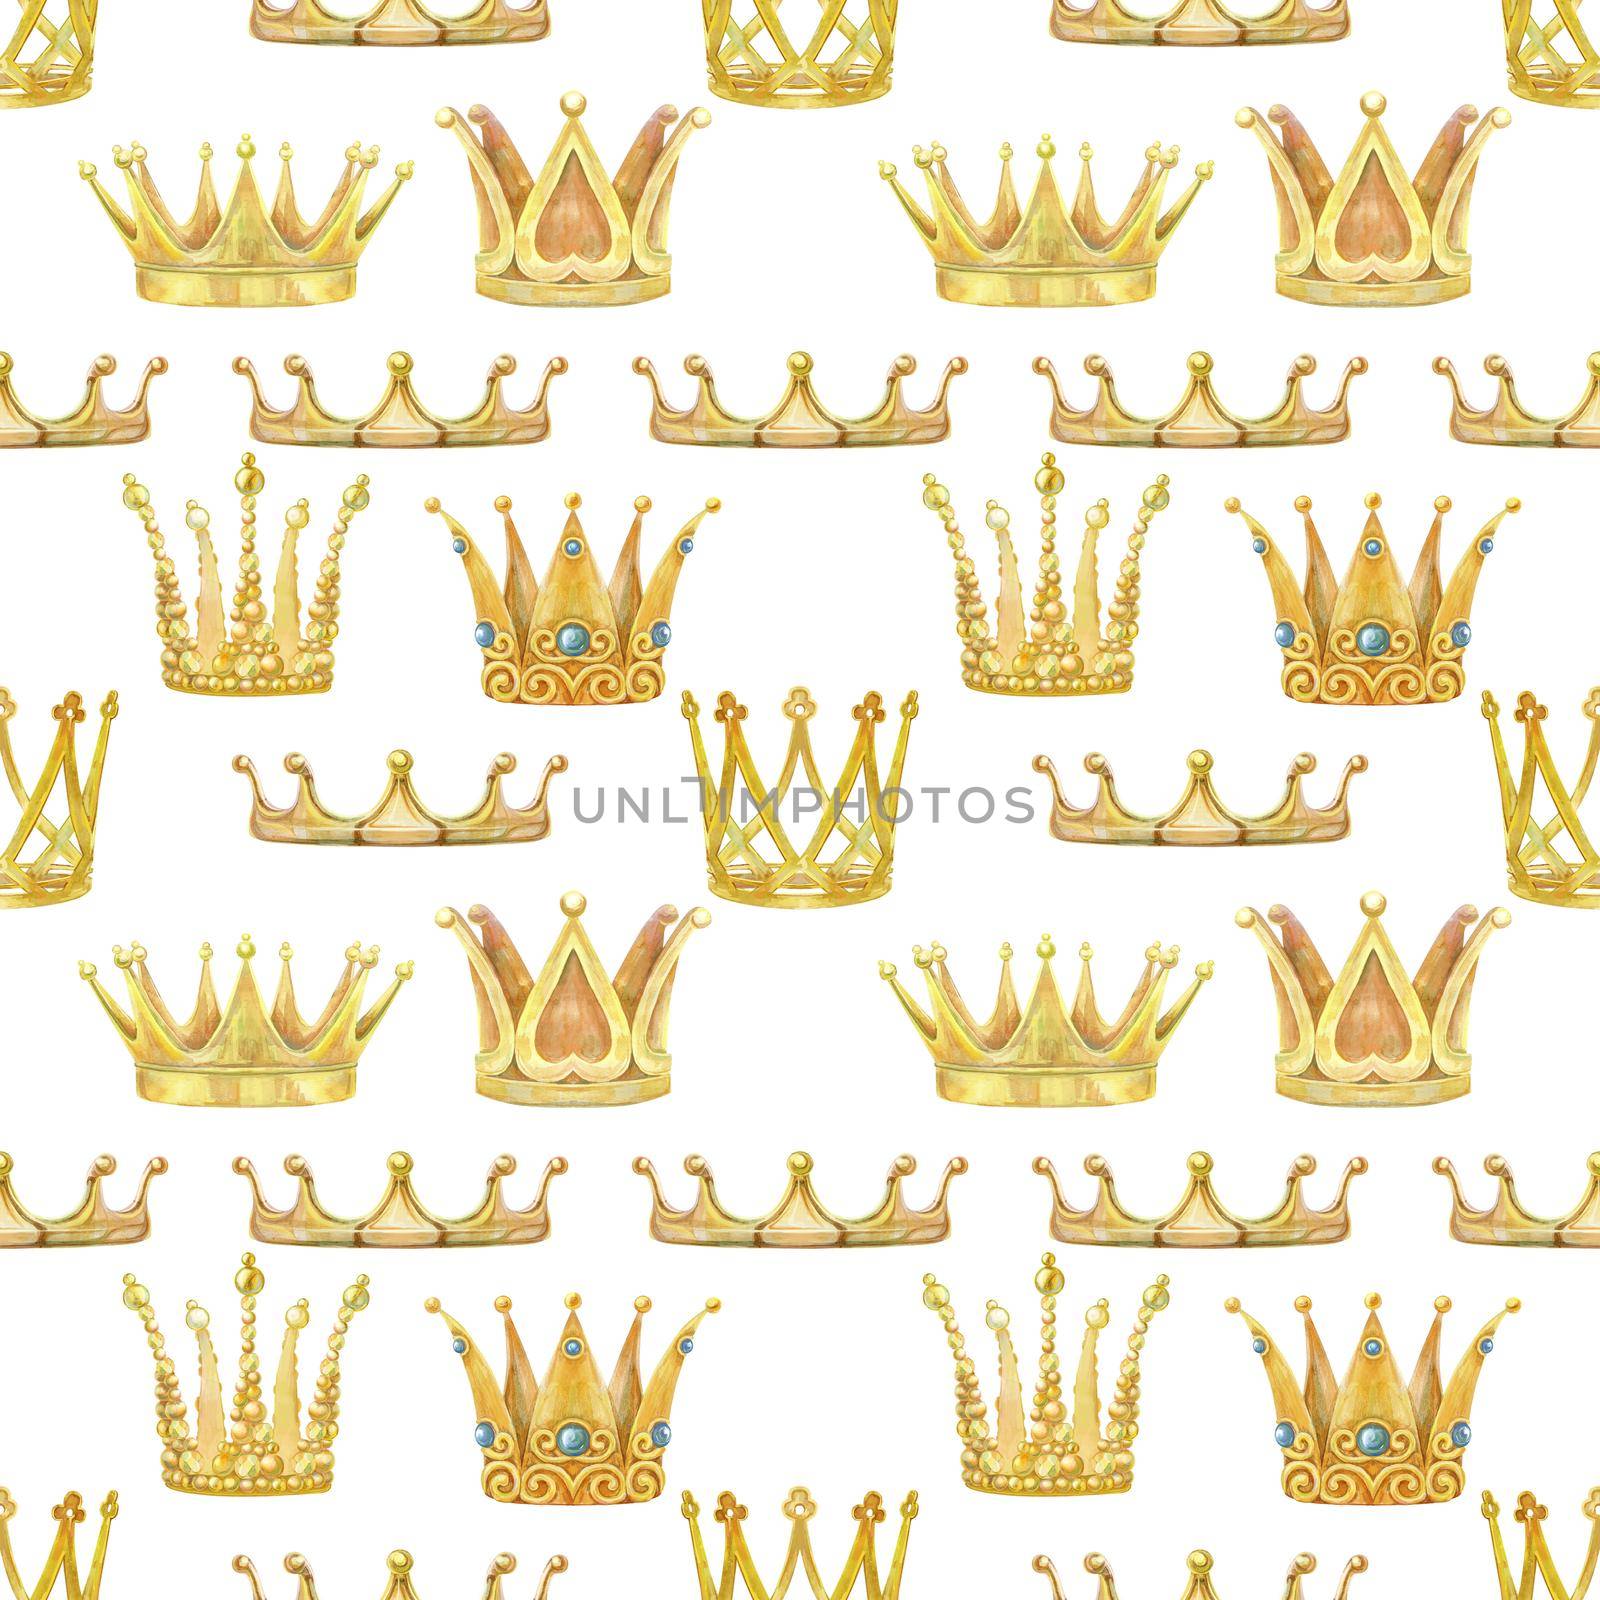 Cute seamless pattern with crown. Watercolor girly texture. Textile or wrapping design.